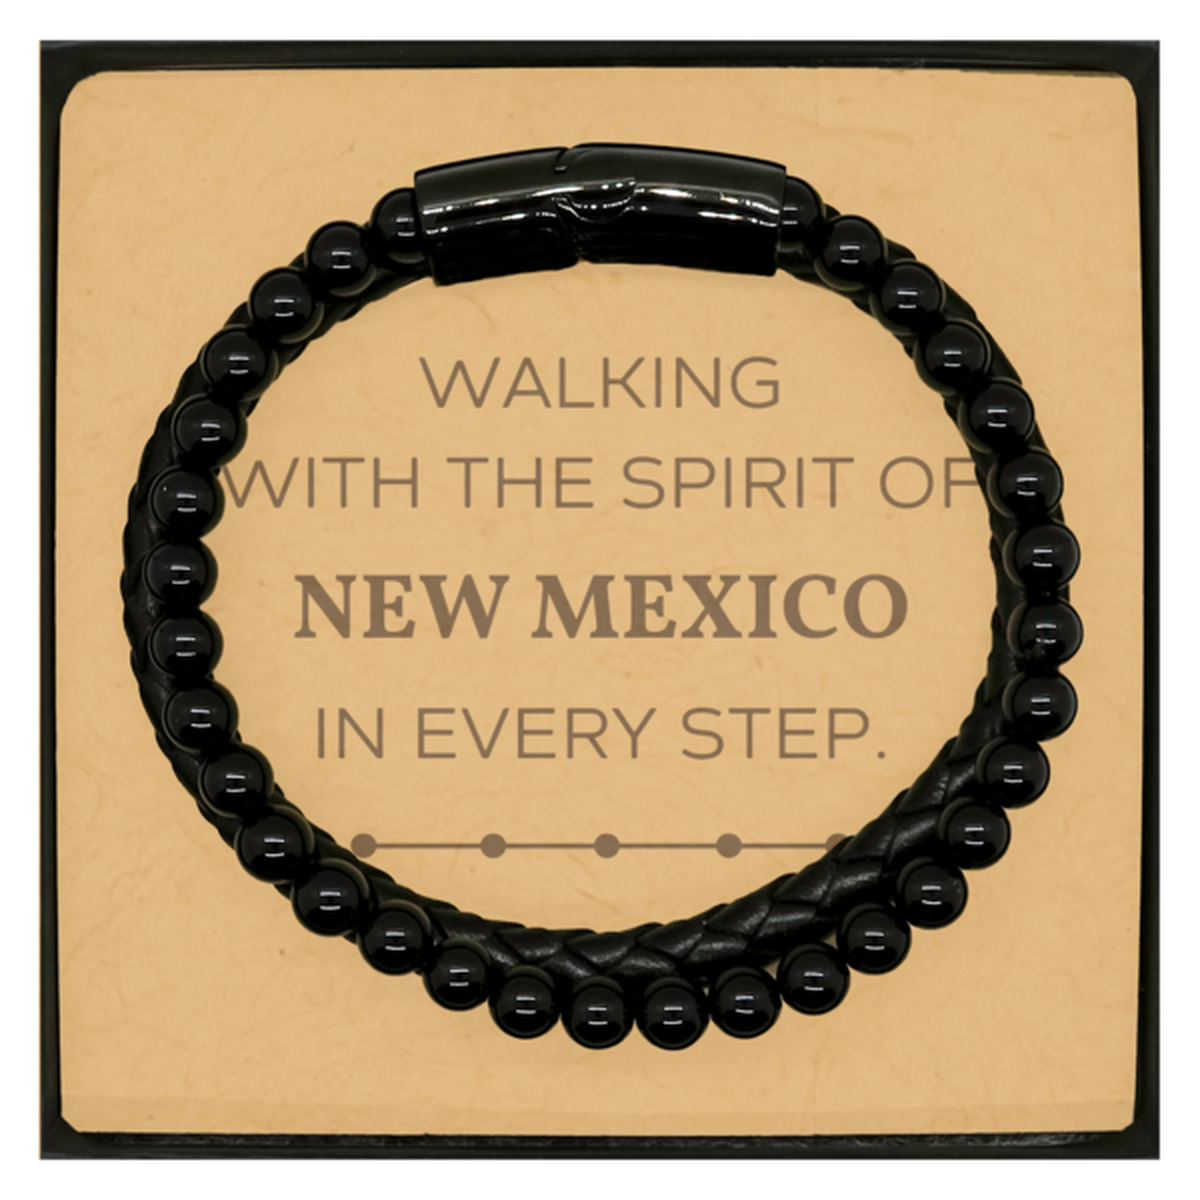 New Mexico Gifts, Walking with the spirit, Love New Mexico Birthday Christmas Stone Leather Bracelets For New Mexico People, Men, Women, Friends